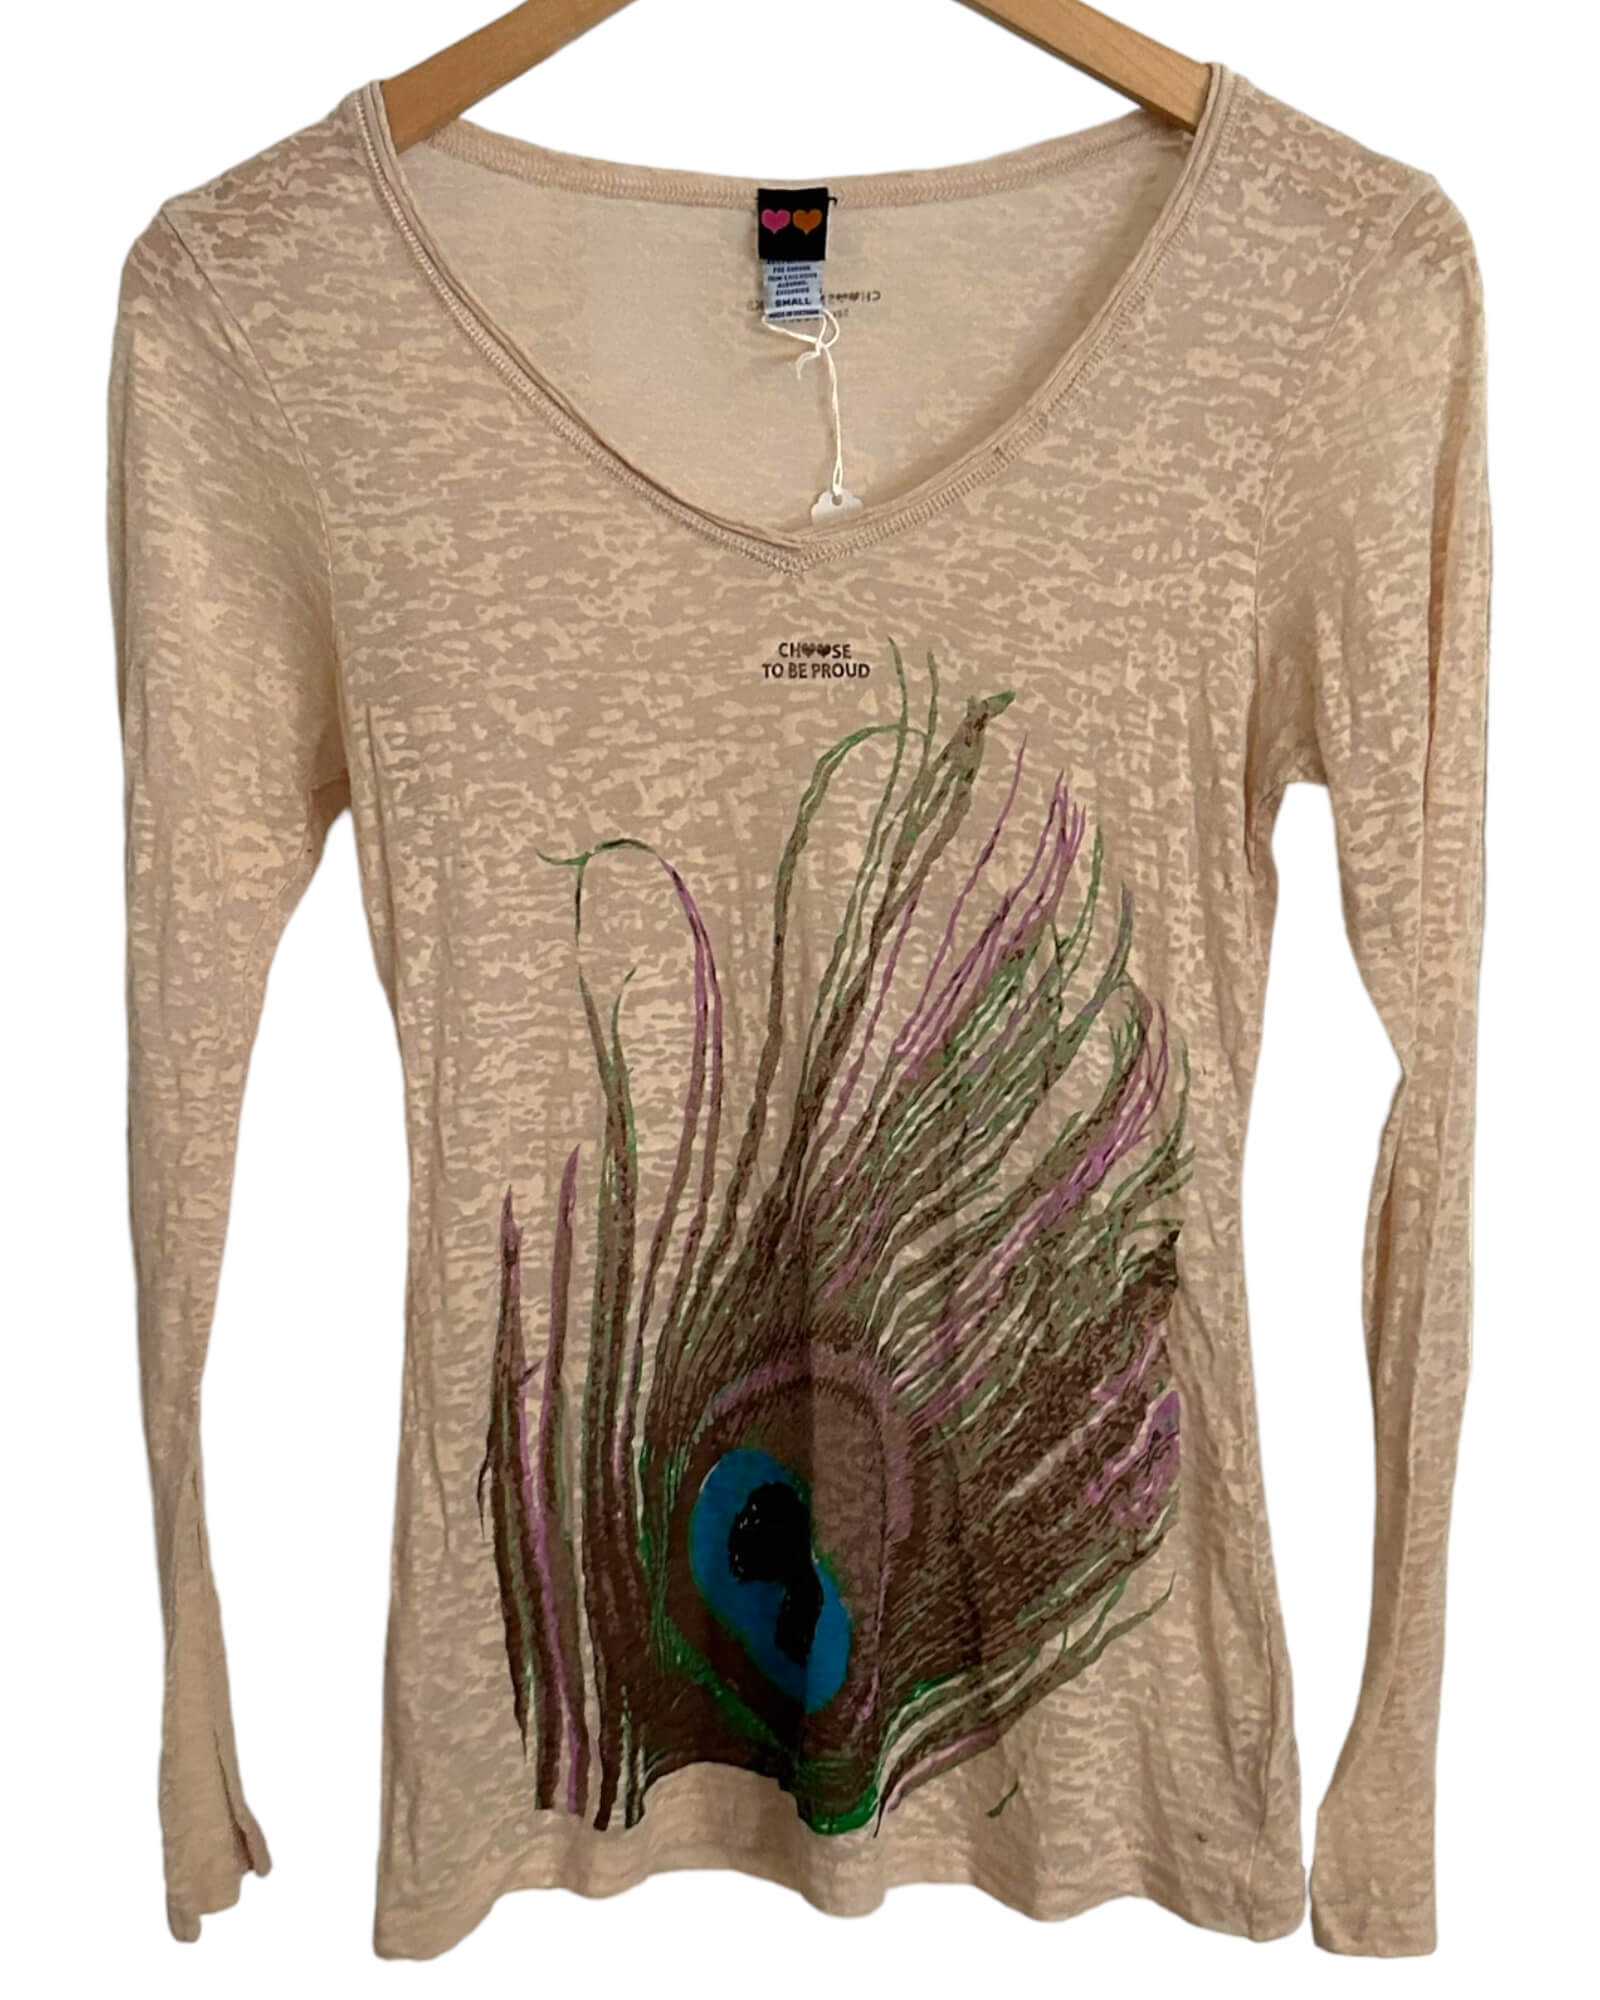 Warm Autumn CHOOSE TO BE PROUD CHOOSY CHICLS peacock feather v-neck tee